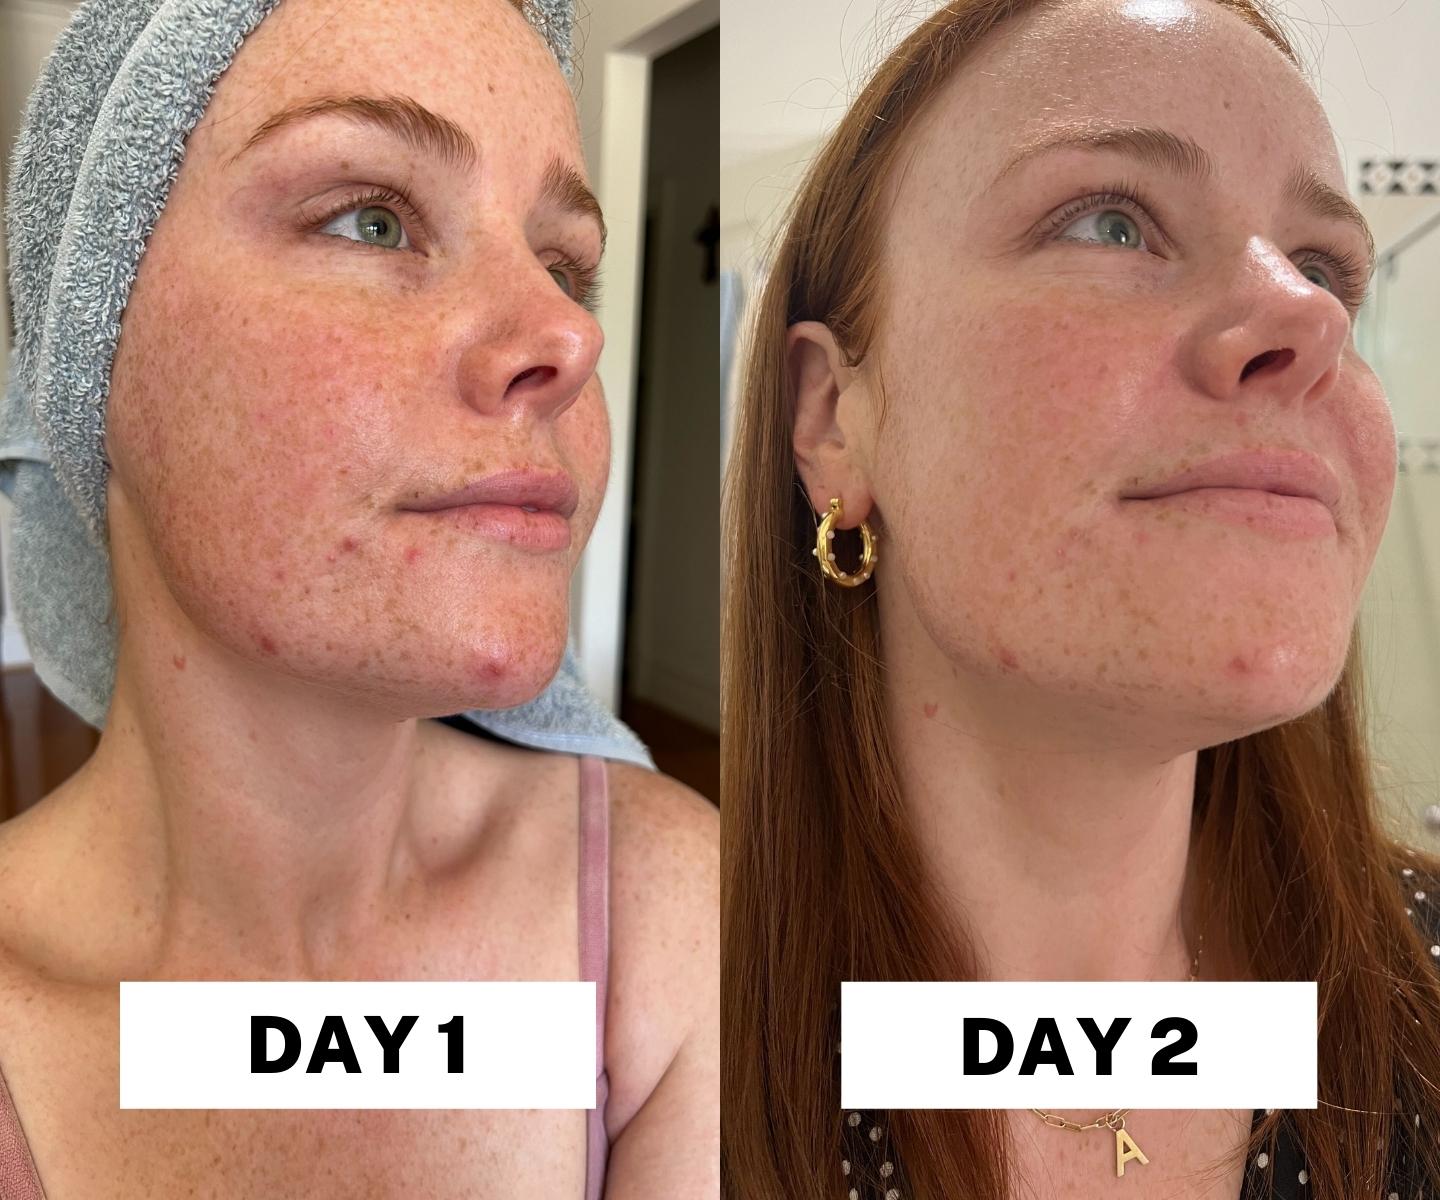 The Ordinary Salicylic Acid Before and After.